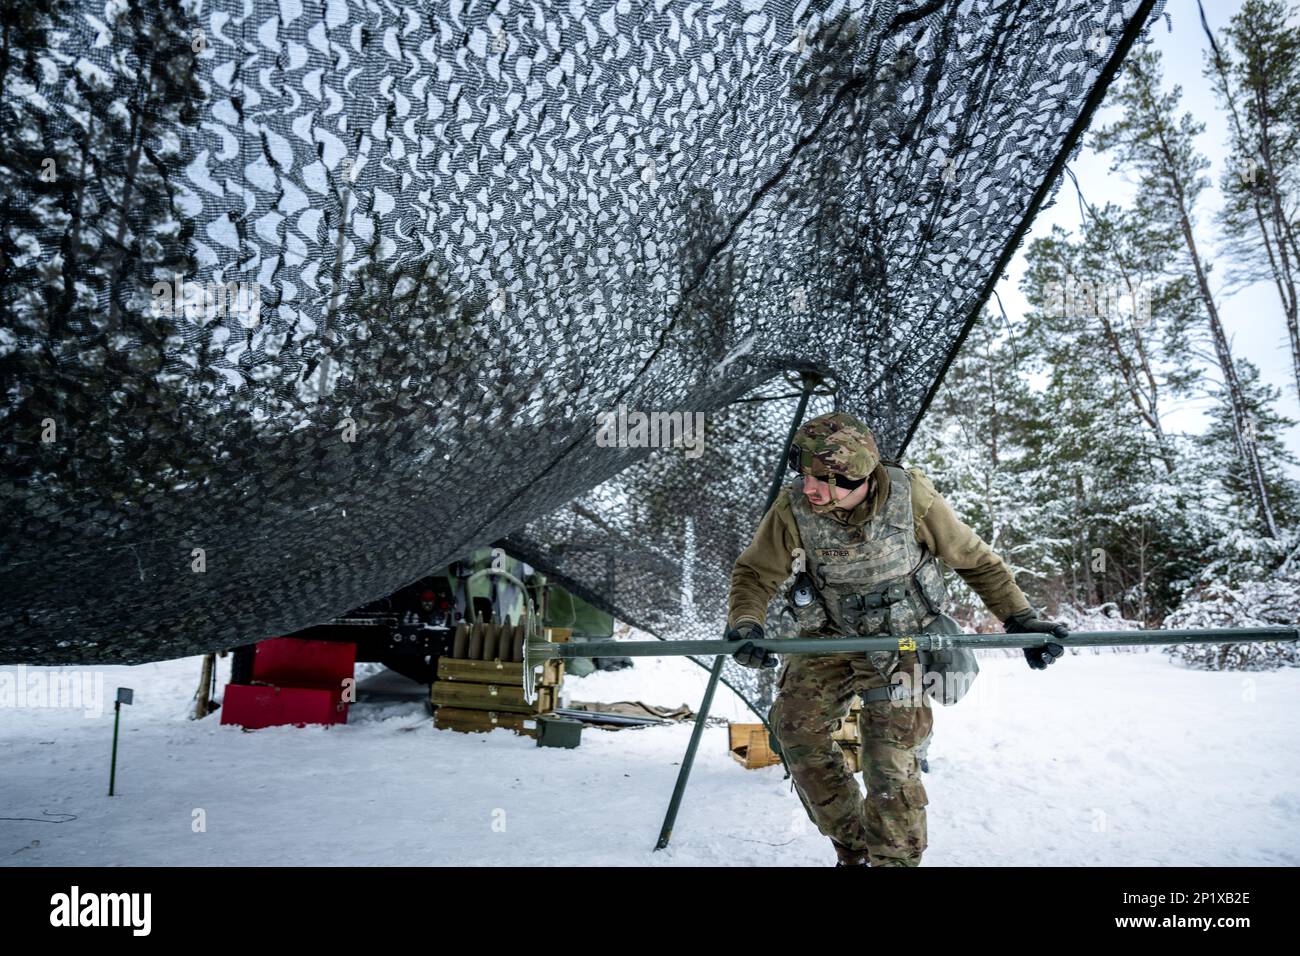 Army Sgt. Trayton Pankratz, 1-120th Field Artillery Regiment, uses a pole to raise a camouflage canopy while setting up an M119 howitzer during Northern Strike 23-1, Jan. 25, 2023, at Camp Grayling, Mich. Units that participate in Northern Strike’s winter iteration build readiness by conducting joint, cold-weather training designed to meet objectives of the Department of Defense’s Arctic Strategy. Stock Photo